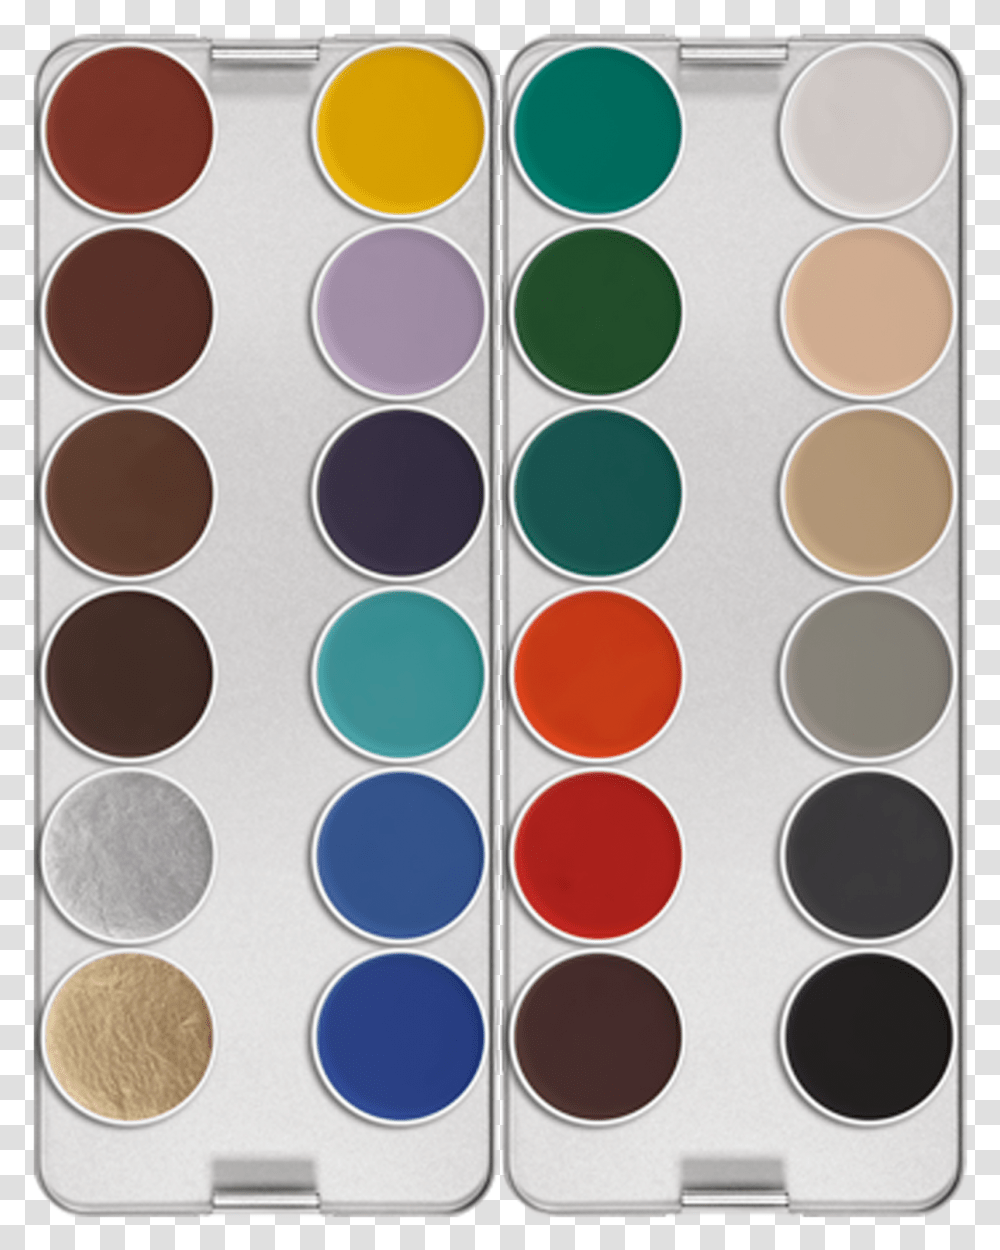 Kryolan Lipstick Palette Price, Paint Container, Rug, Texture, Polka Dot Transparent Png